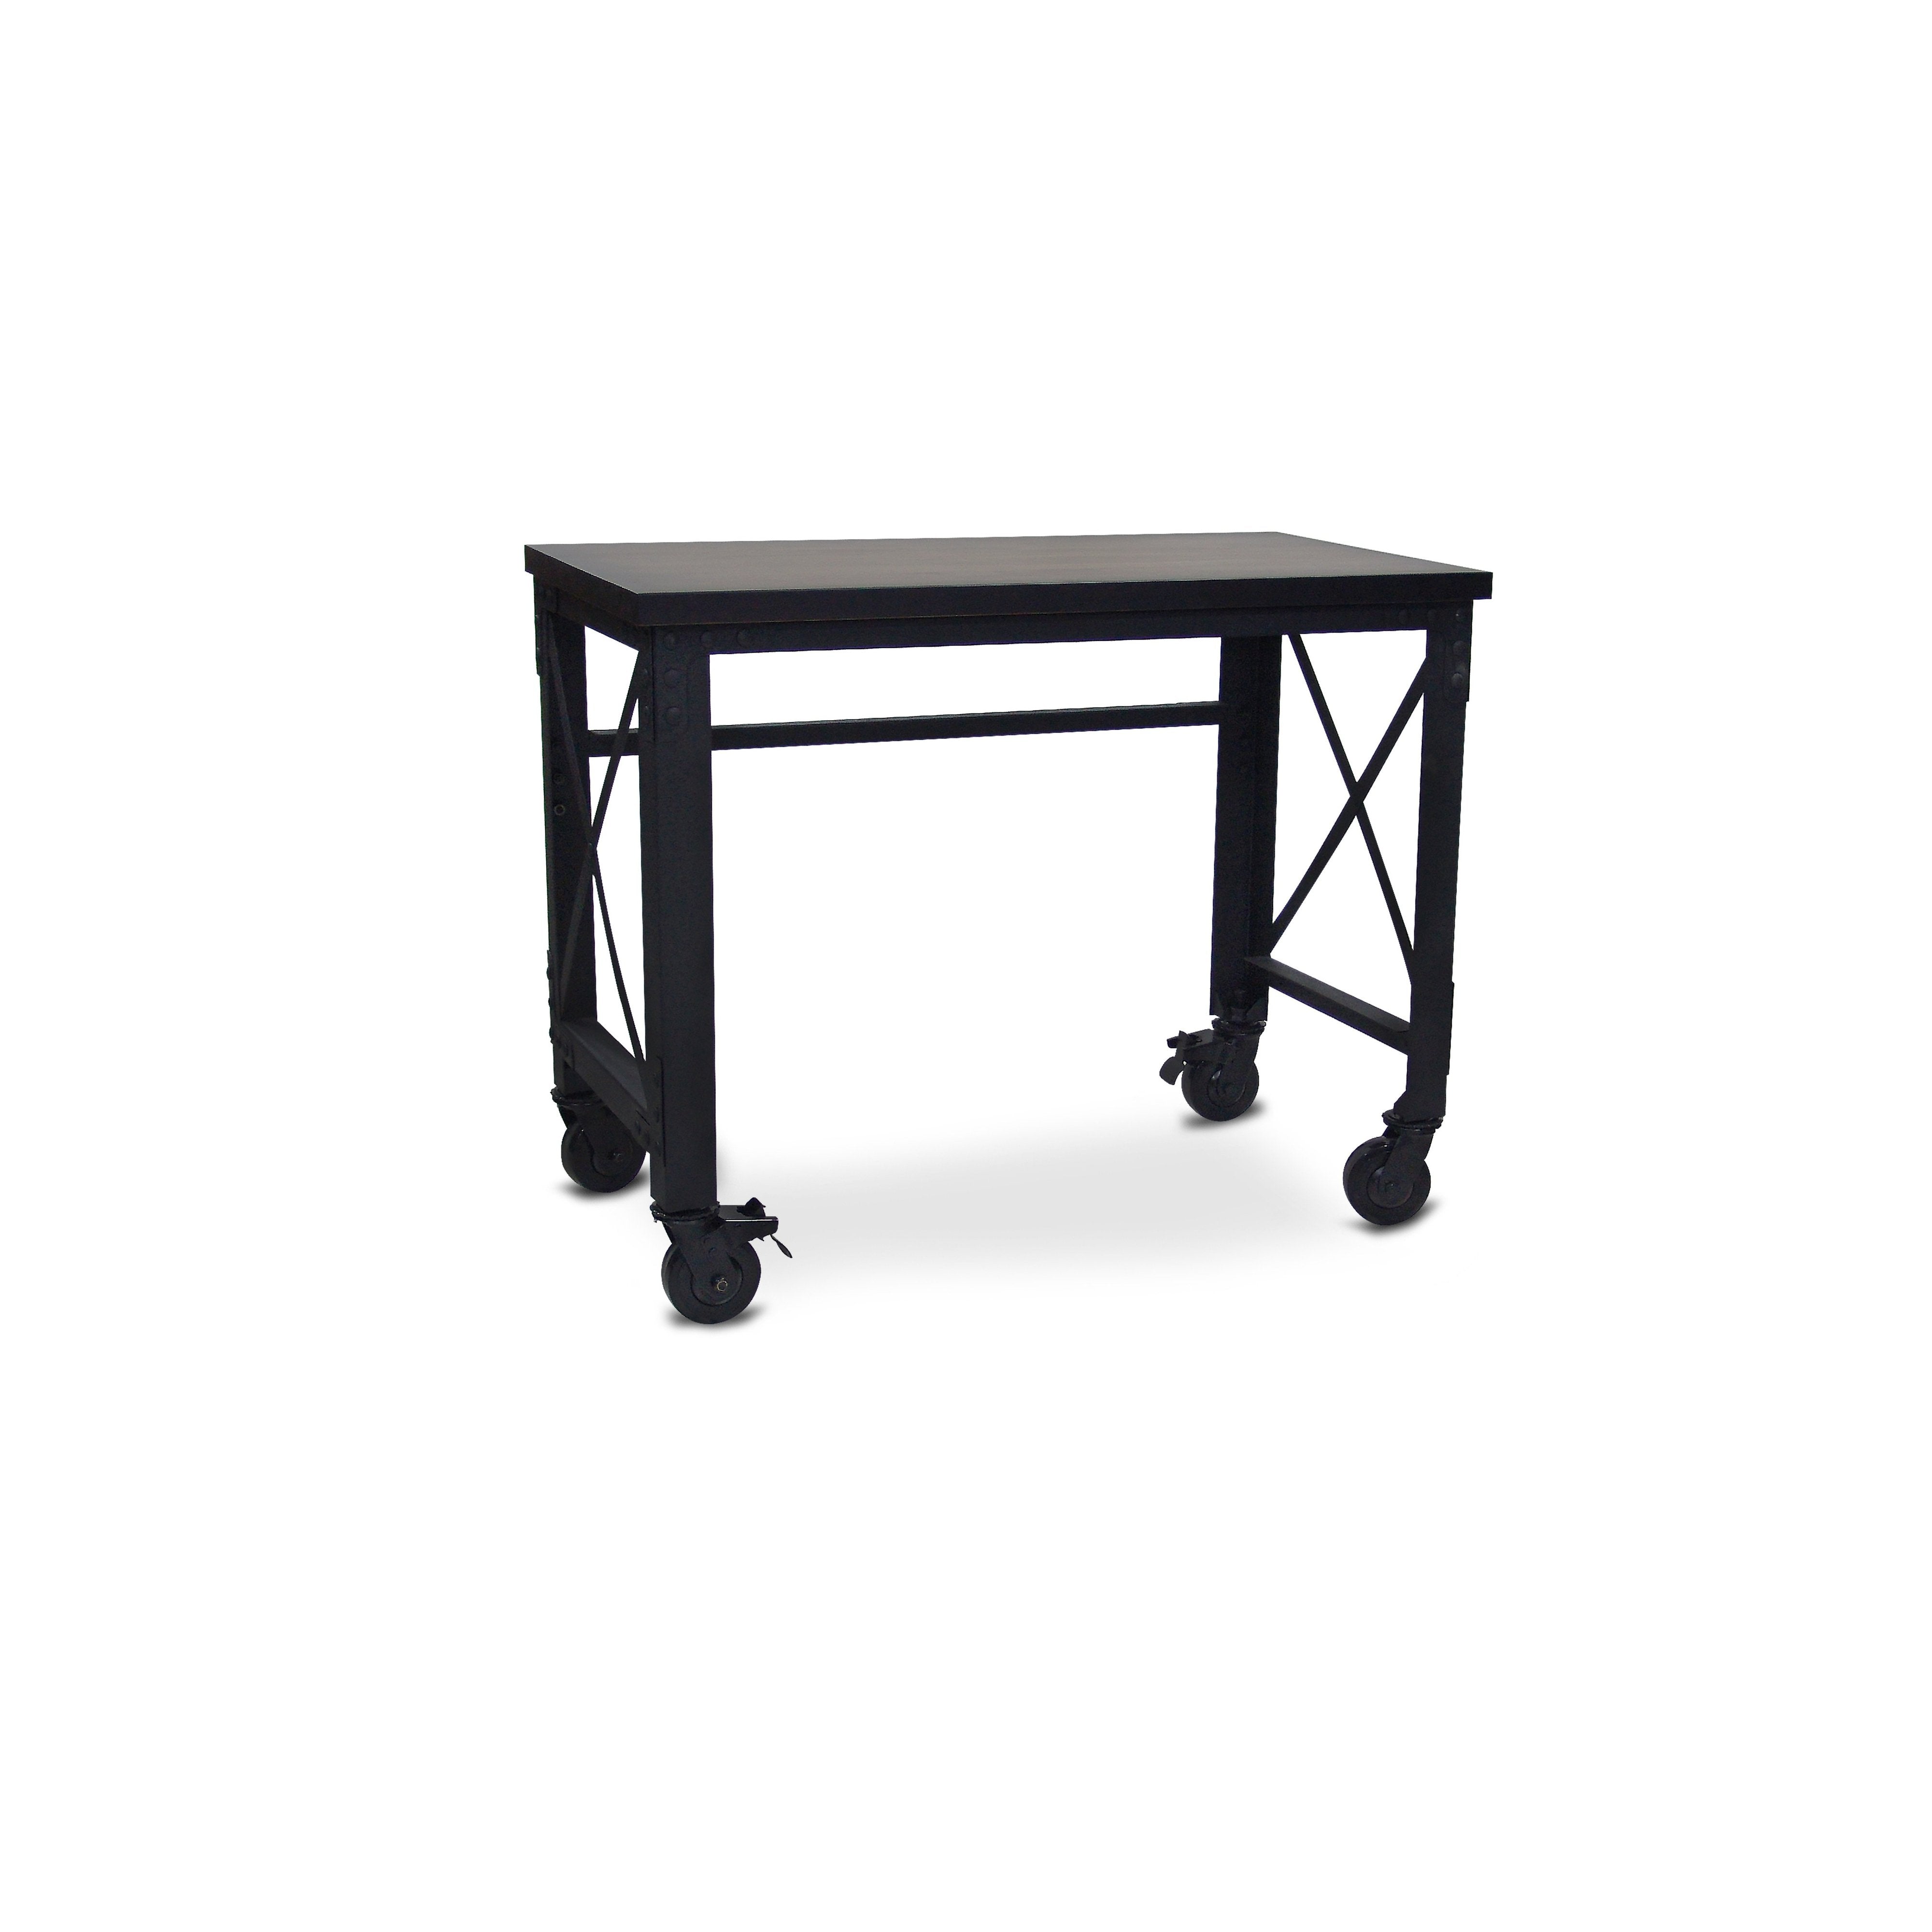 Durasheds furniture Duramax Rolling Industrial Desk with Wooden Top 46 Inches x 24 Inches